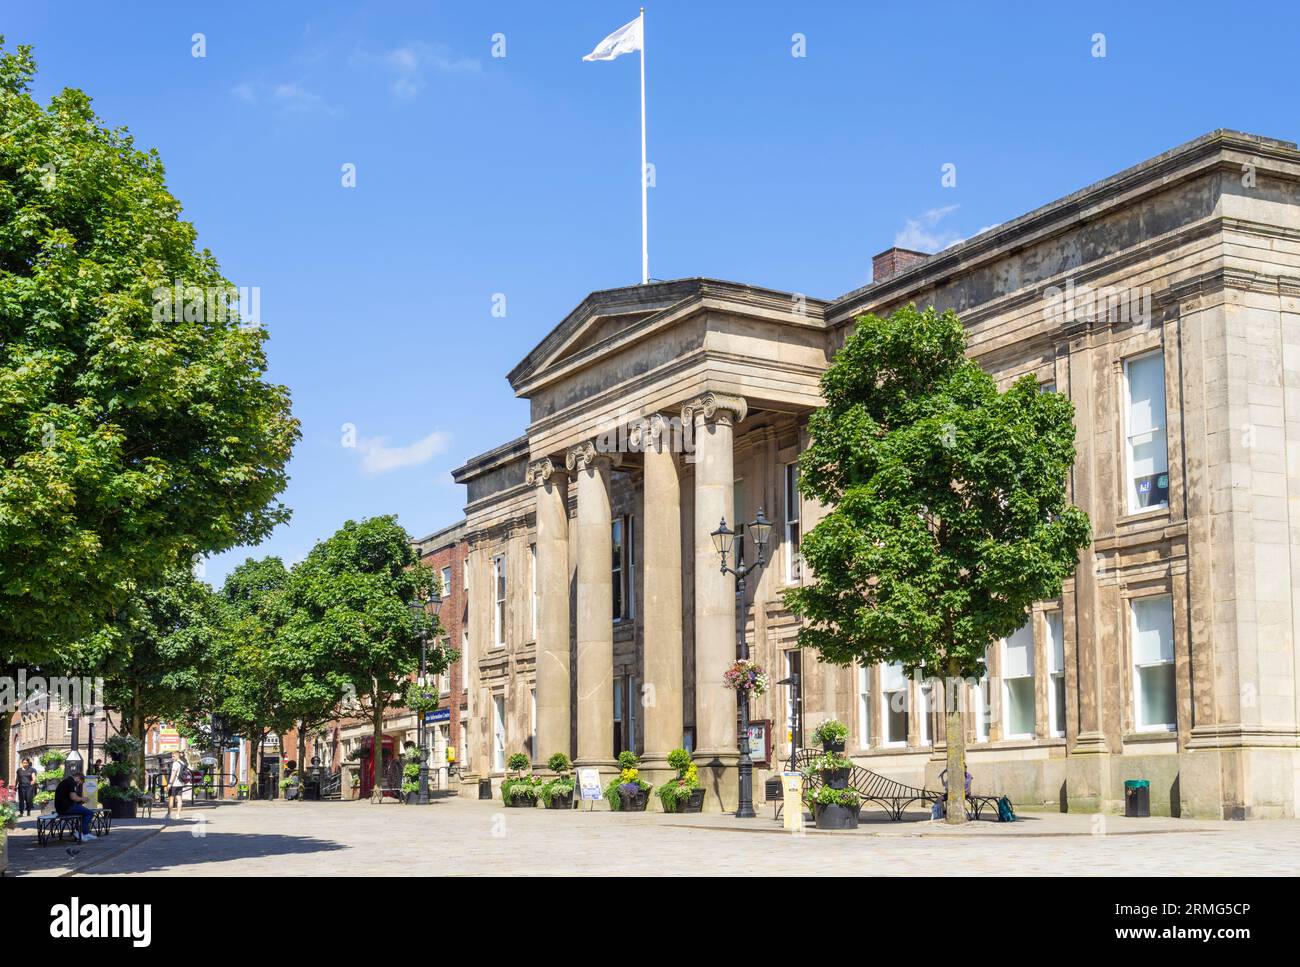 Macclesfield Town Hall in Macclesfield Market place Cheshire East England UK GB Europe Stock Photo